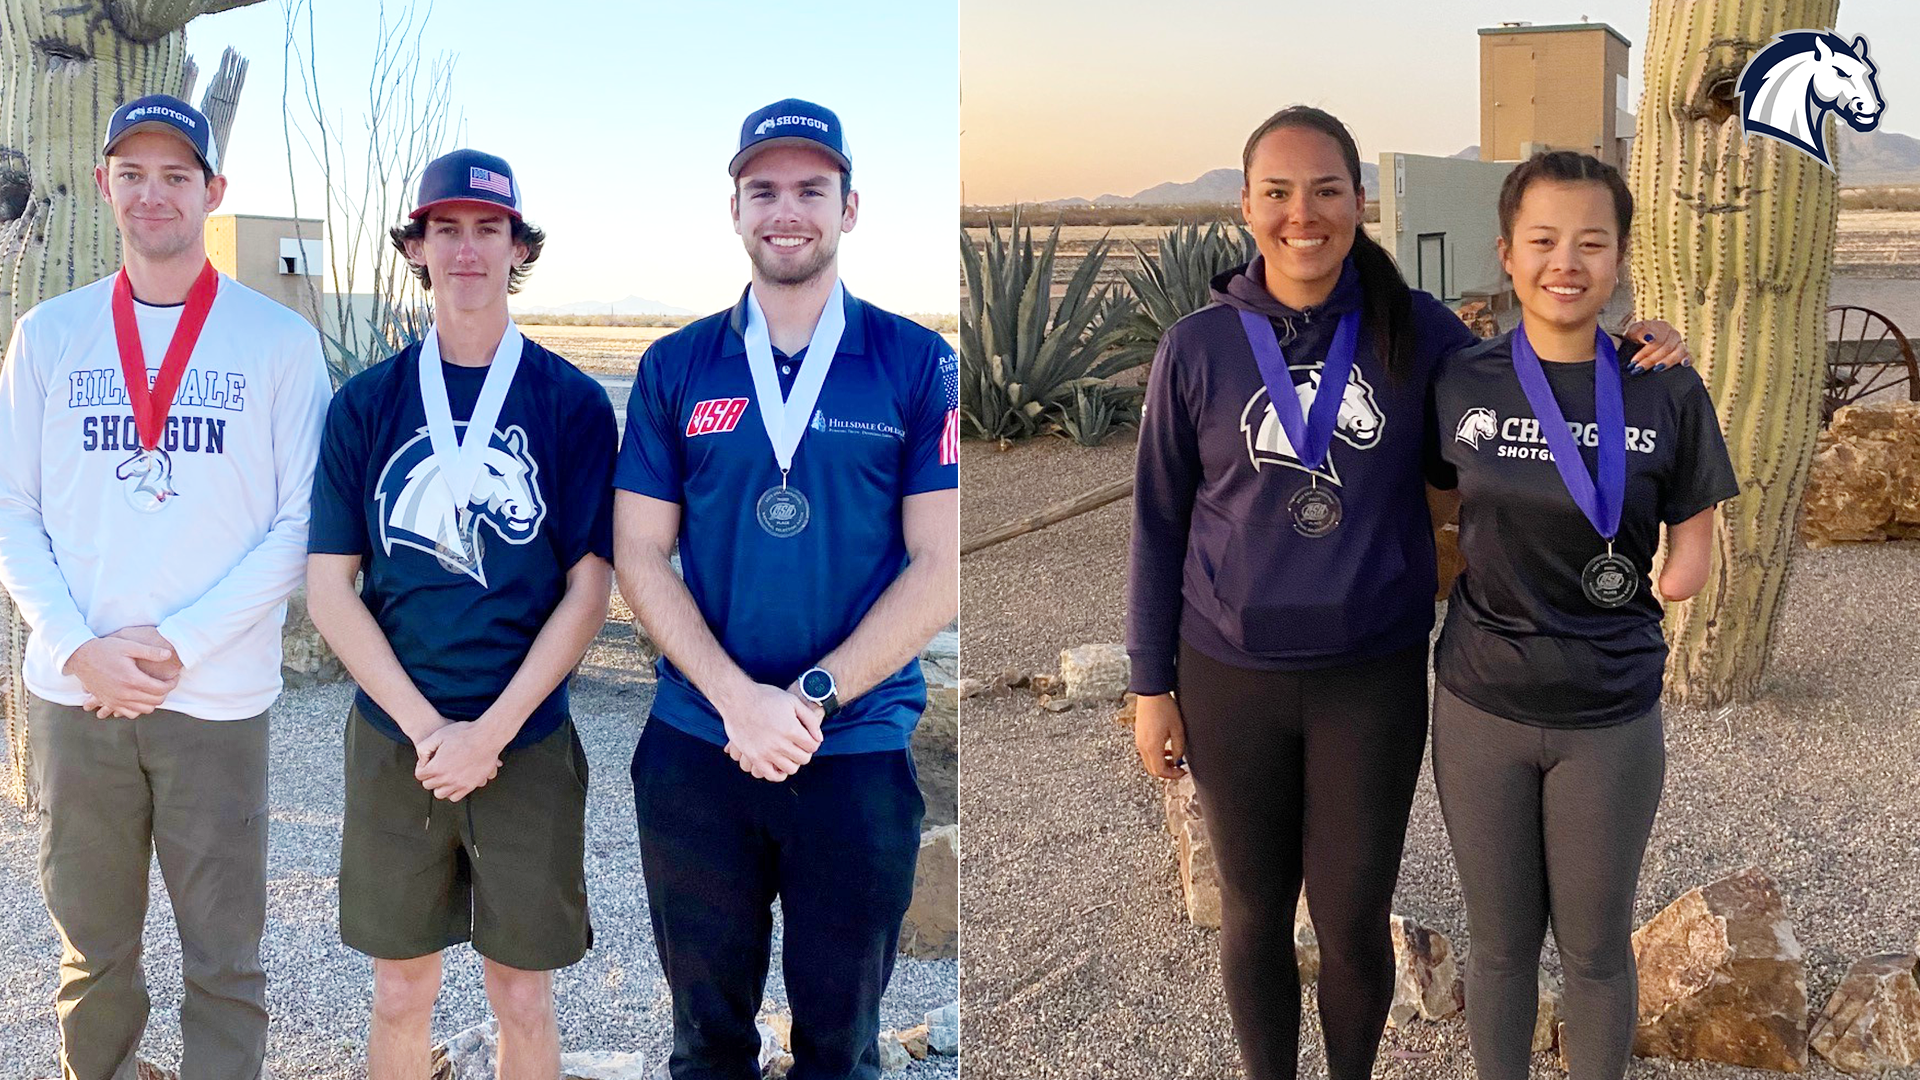 Five Chargers competitors medal in USA Shooting Selection Match in Tucson